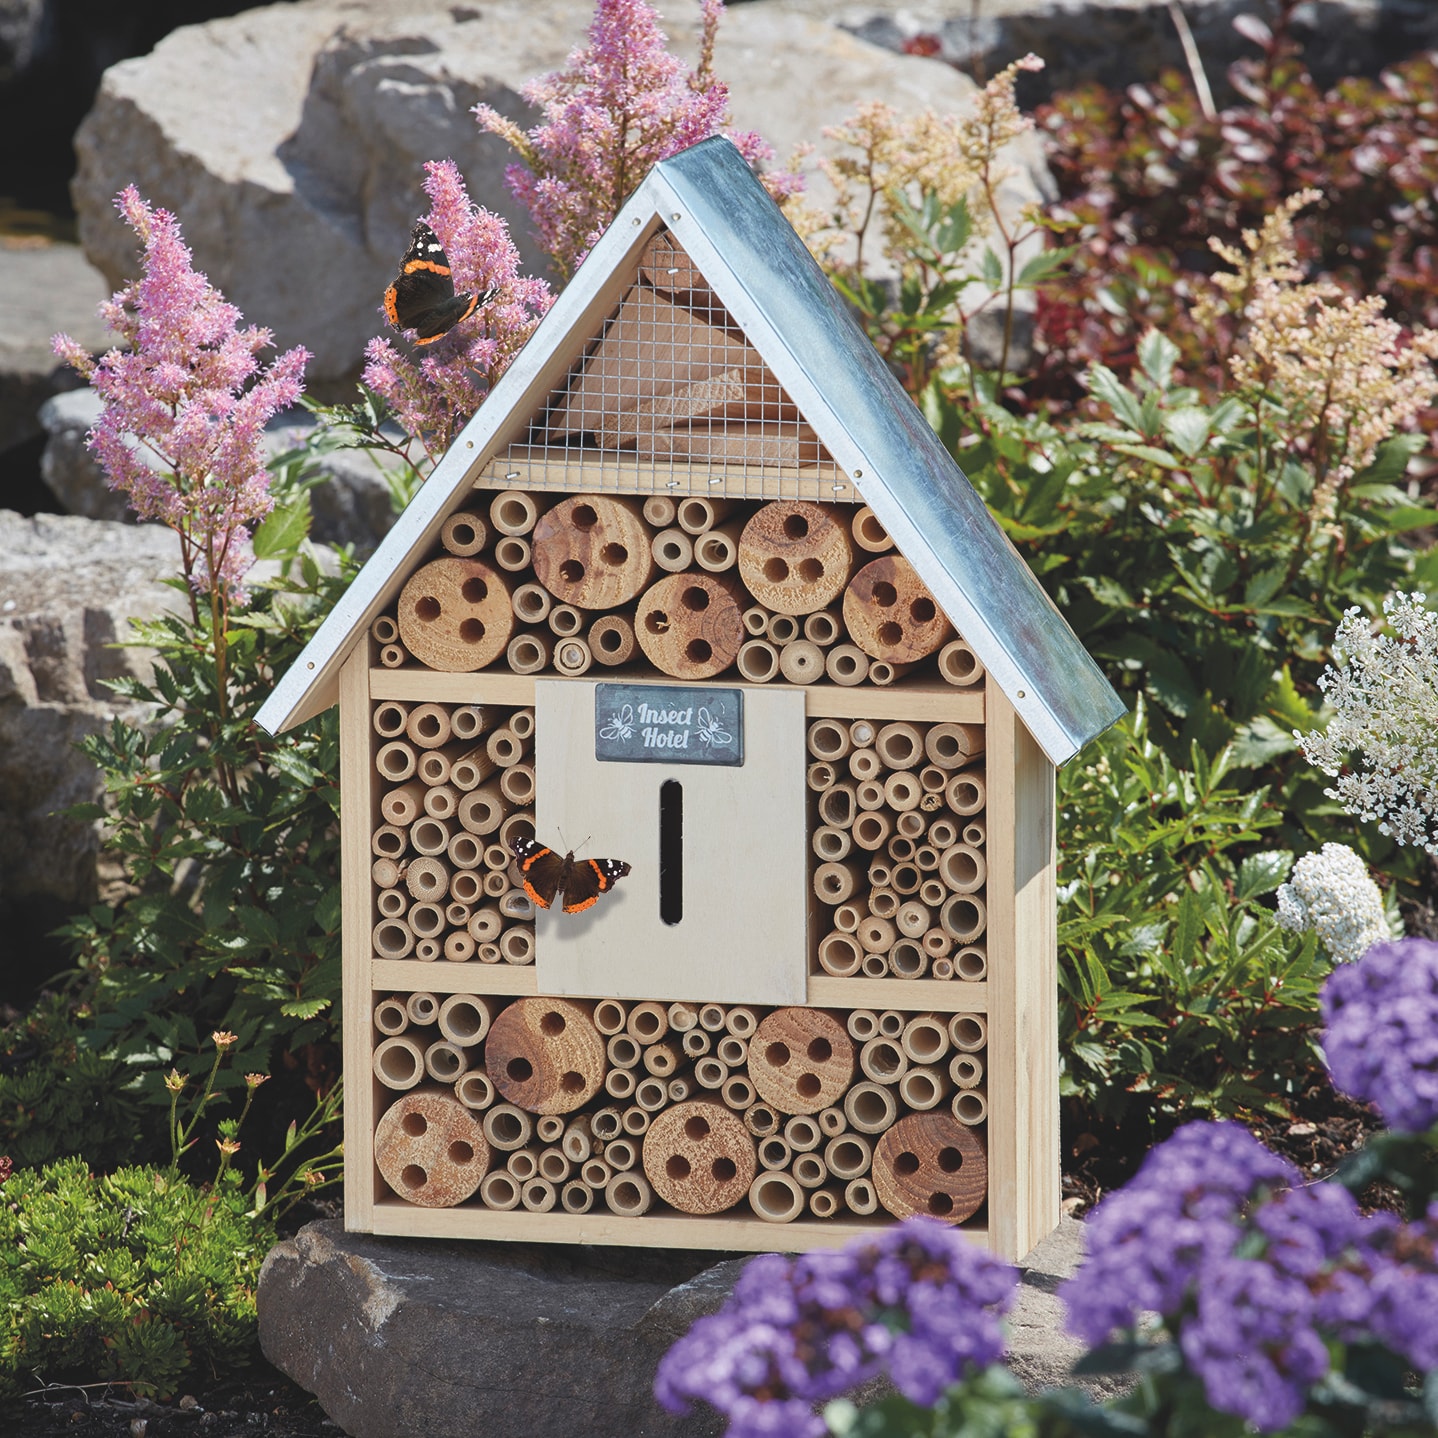 Wooden Insect Hotel from Suttons